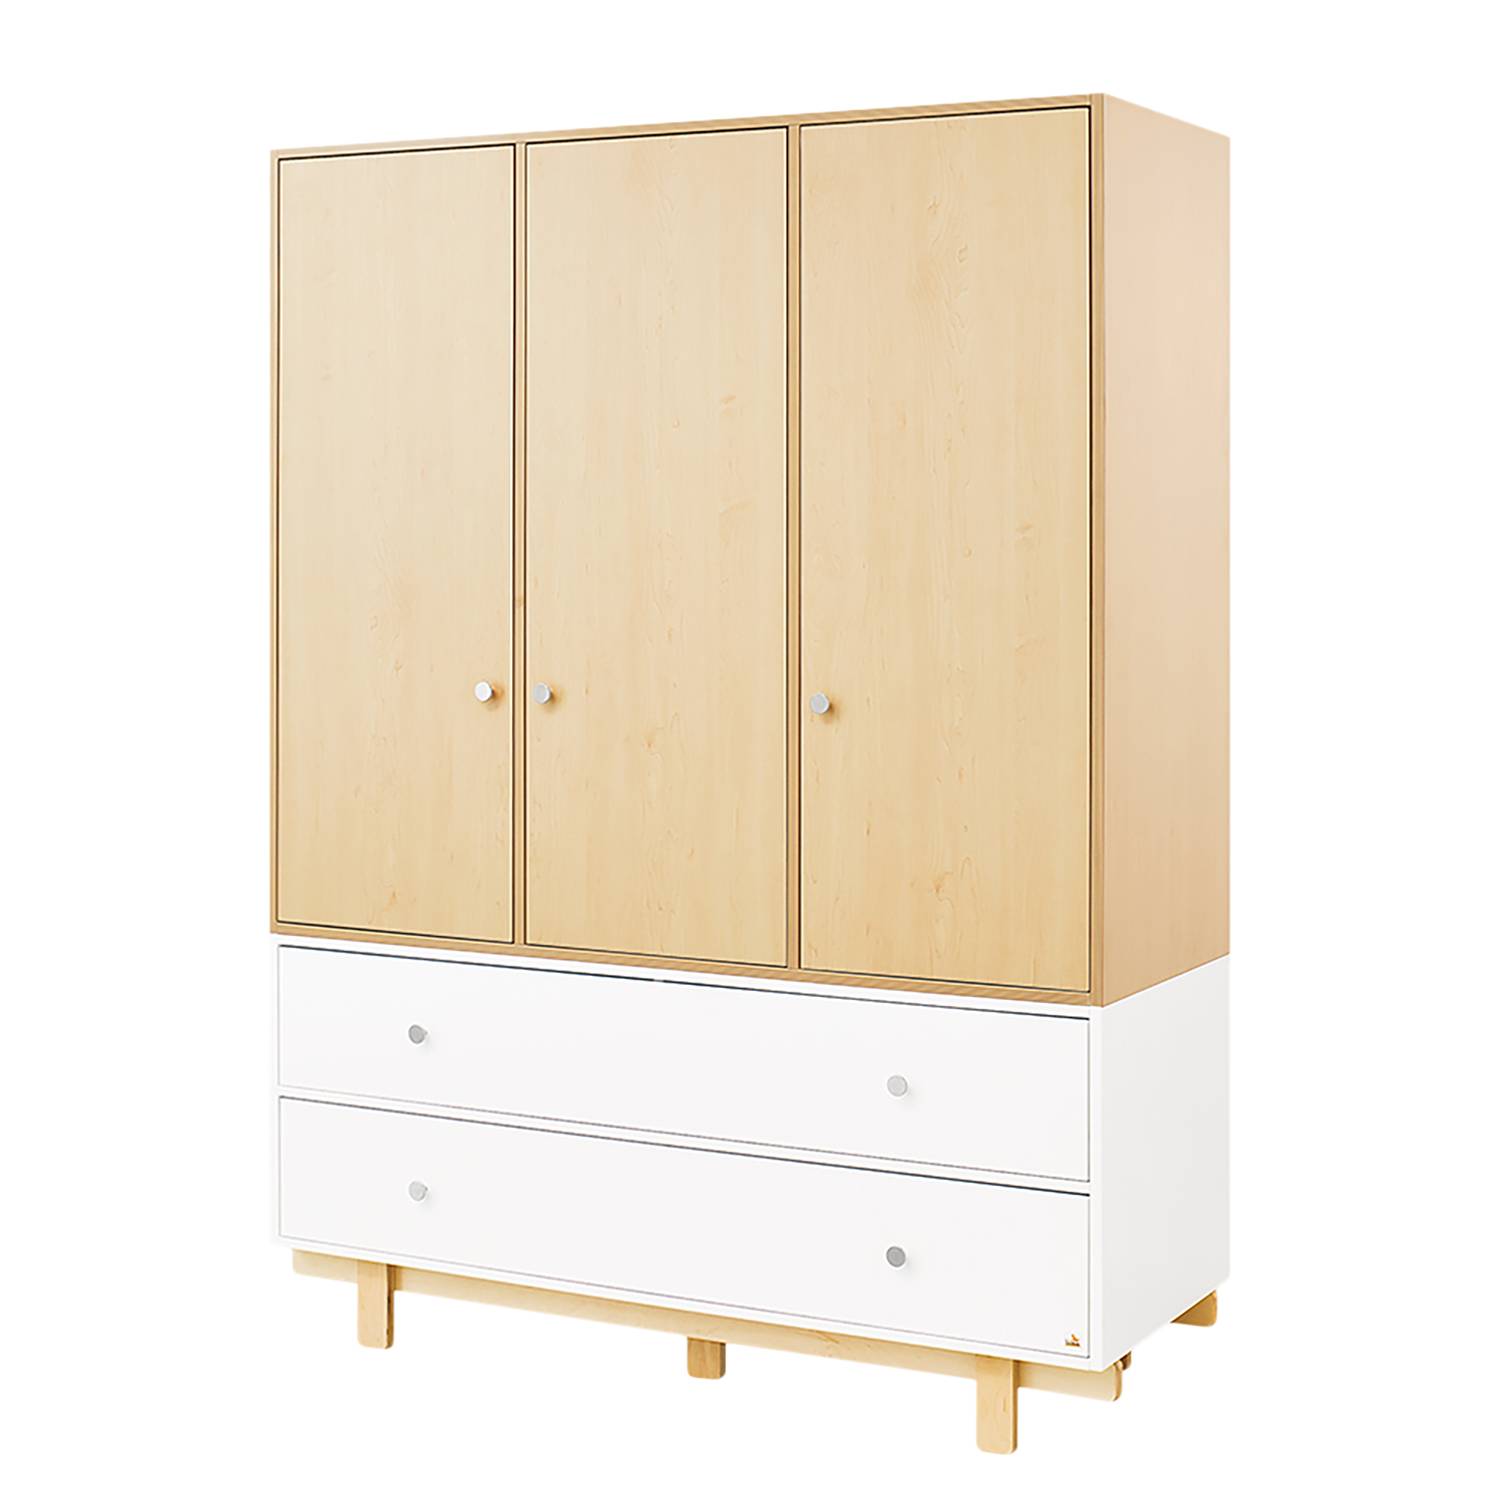 Image of Armoire Boks 000000001000205960